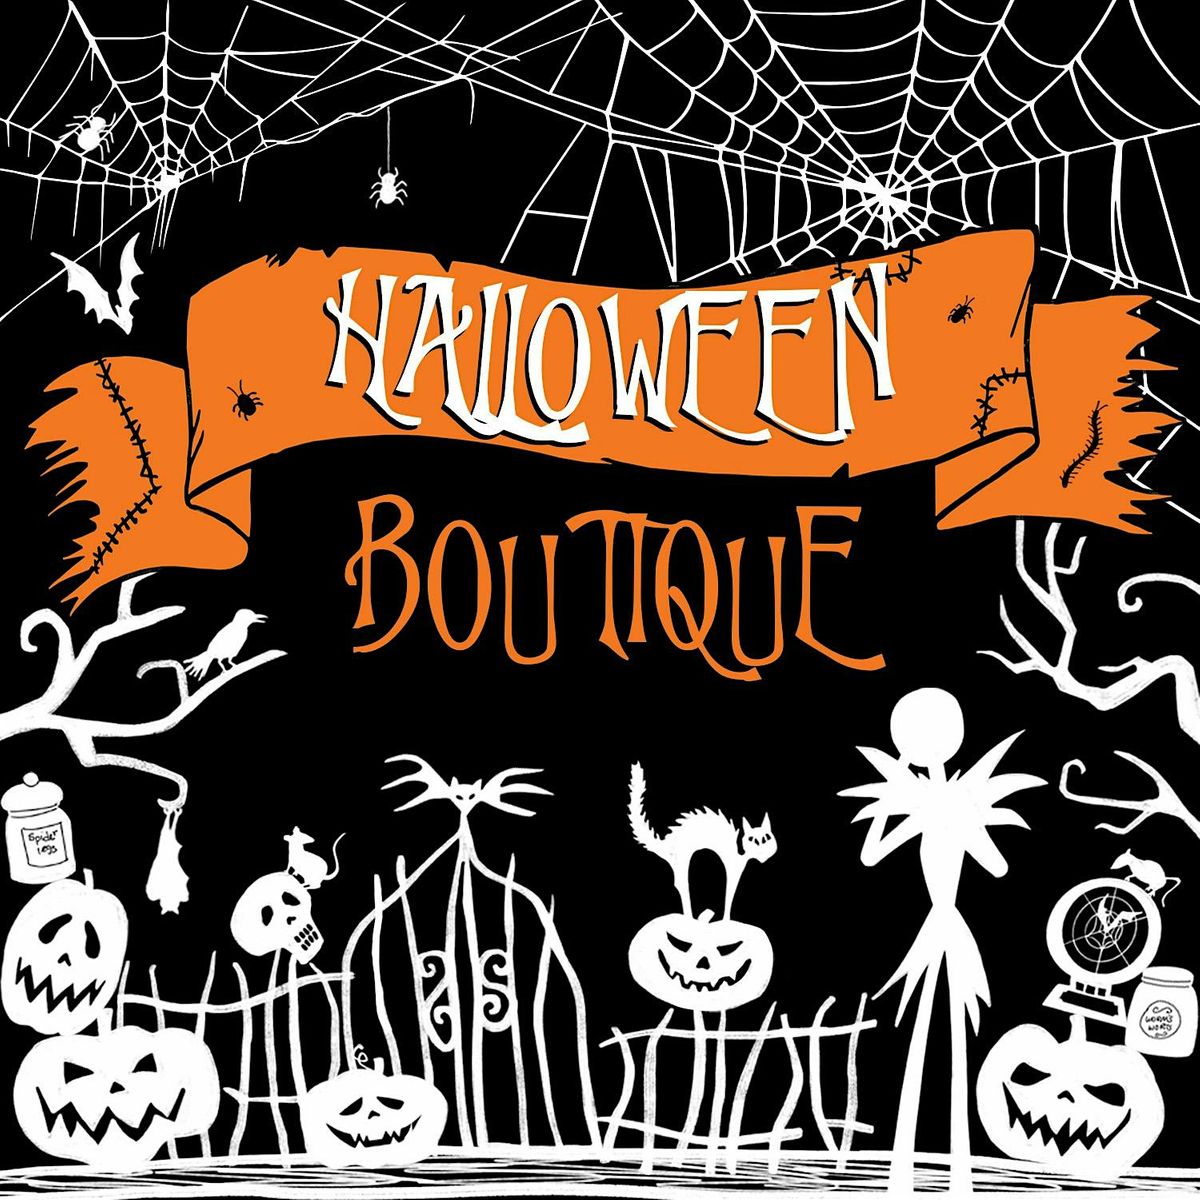 EVENT: Halloween Boutique Opening